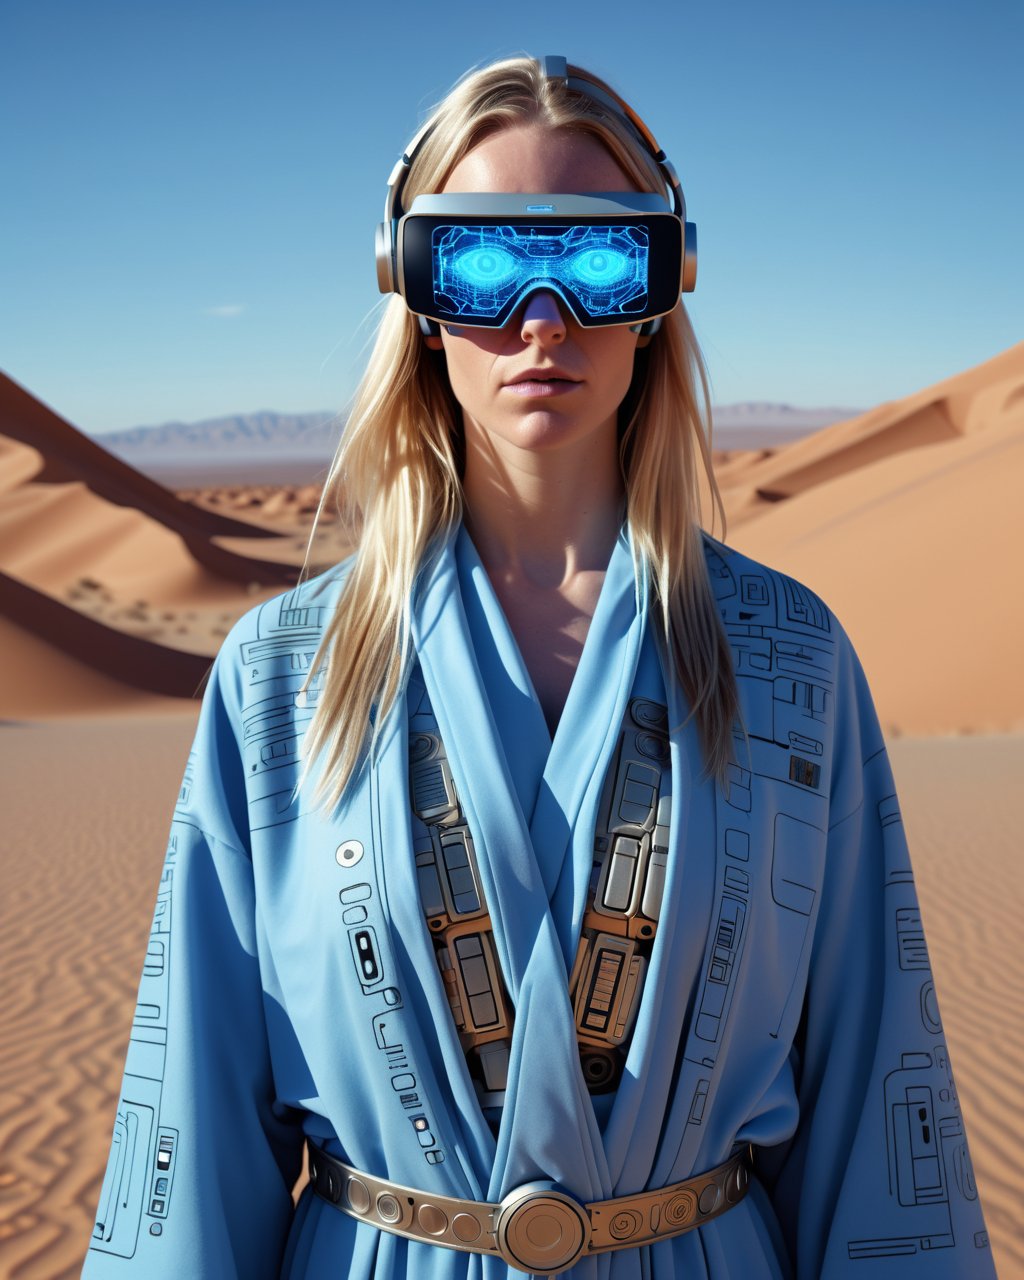 Fragmentation of forms, motherboard, speakers, music playback, people in robes, blue eyes, desert, ancient keepers of secret knowledge covered with augmented reality, portrait, realistic photo, professional photo